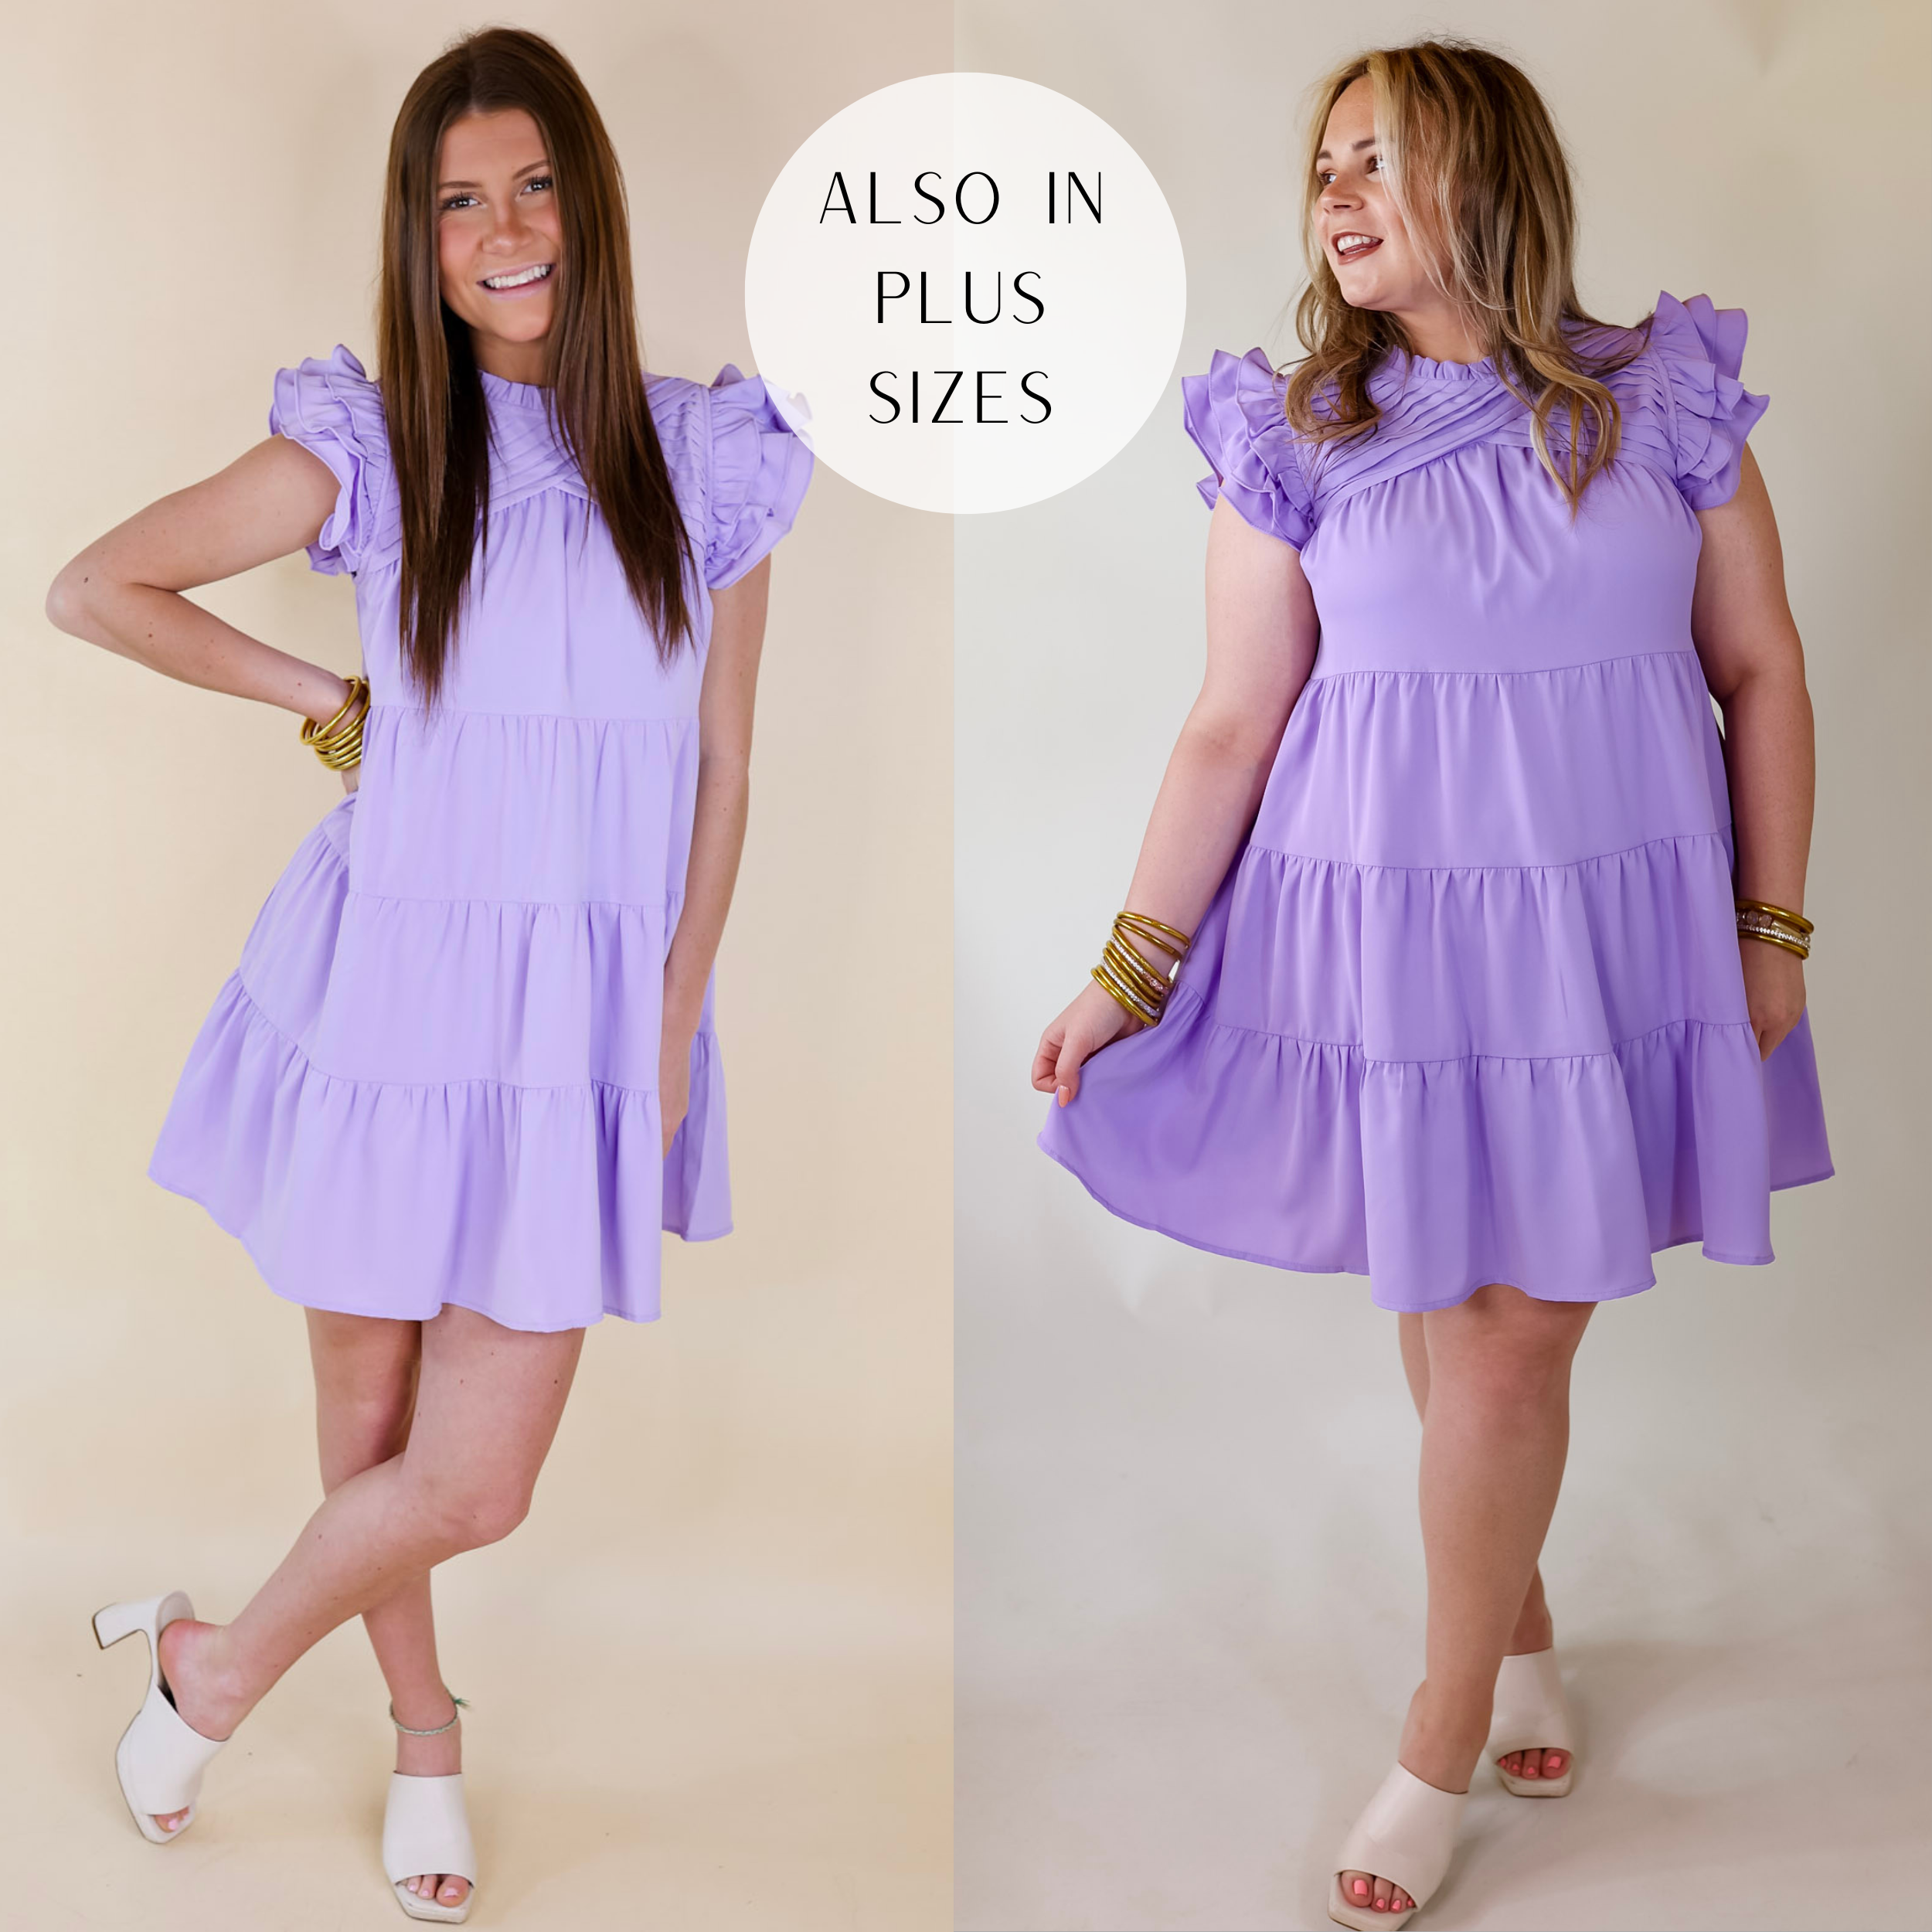 Model is wearing a lavender purple dress with pleated detailing and ruffle cap sleeves. Model has this paired with white heels and gold jewelry.